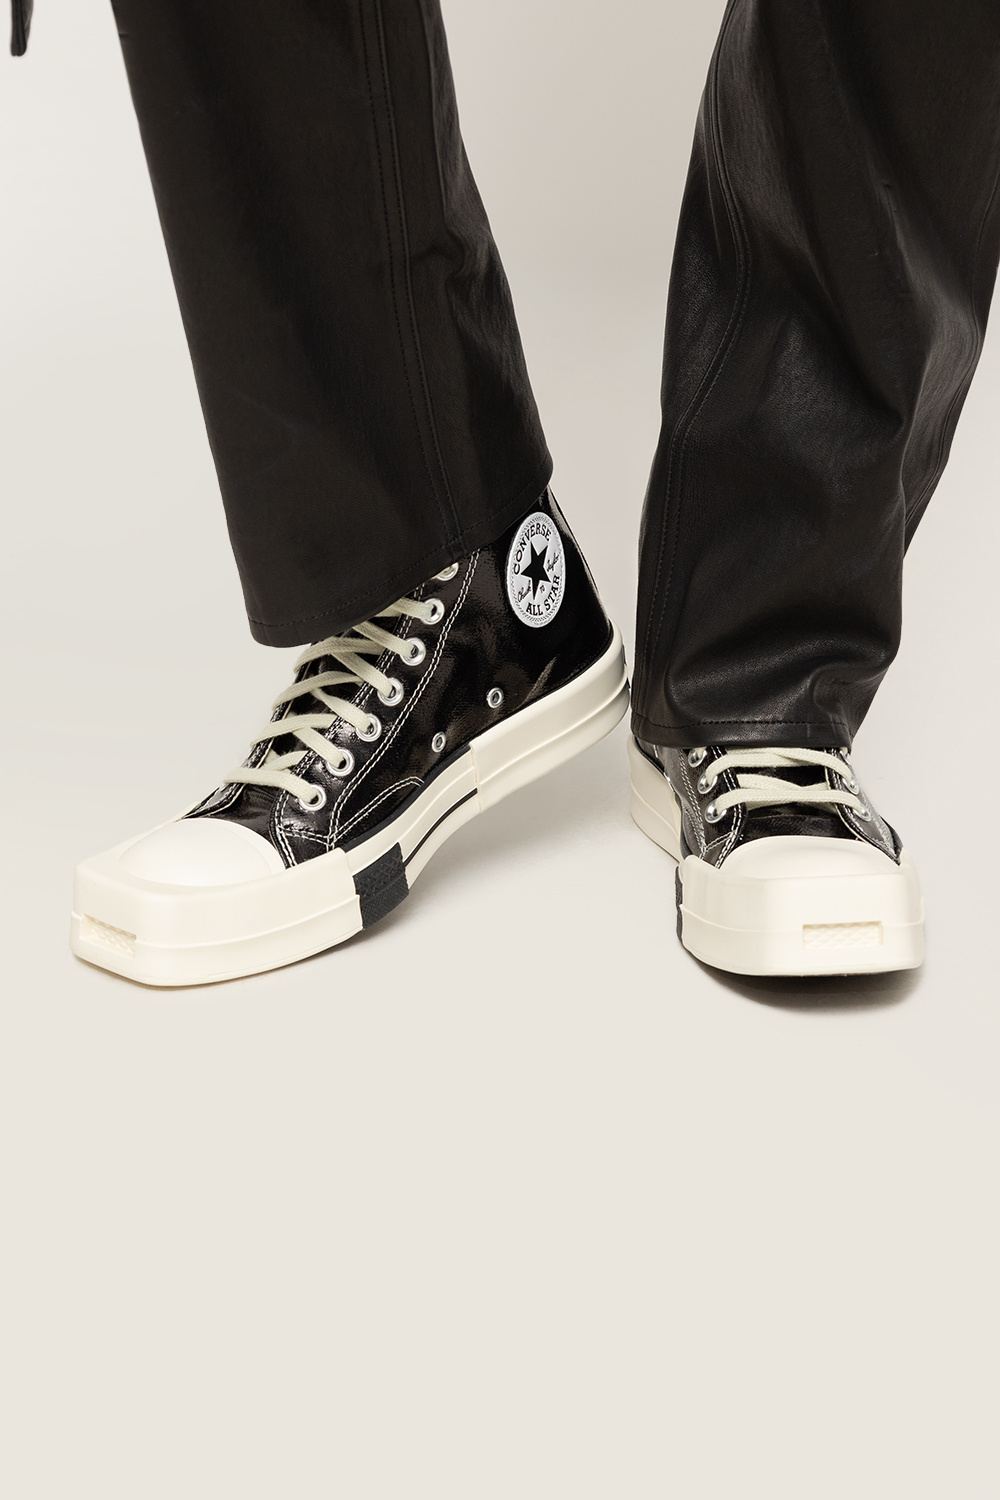 converse Low converse Low converse Low branding to front